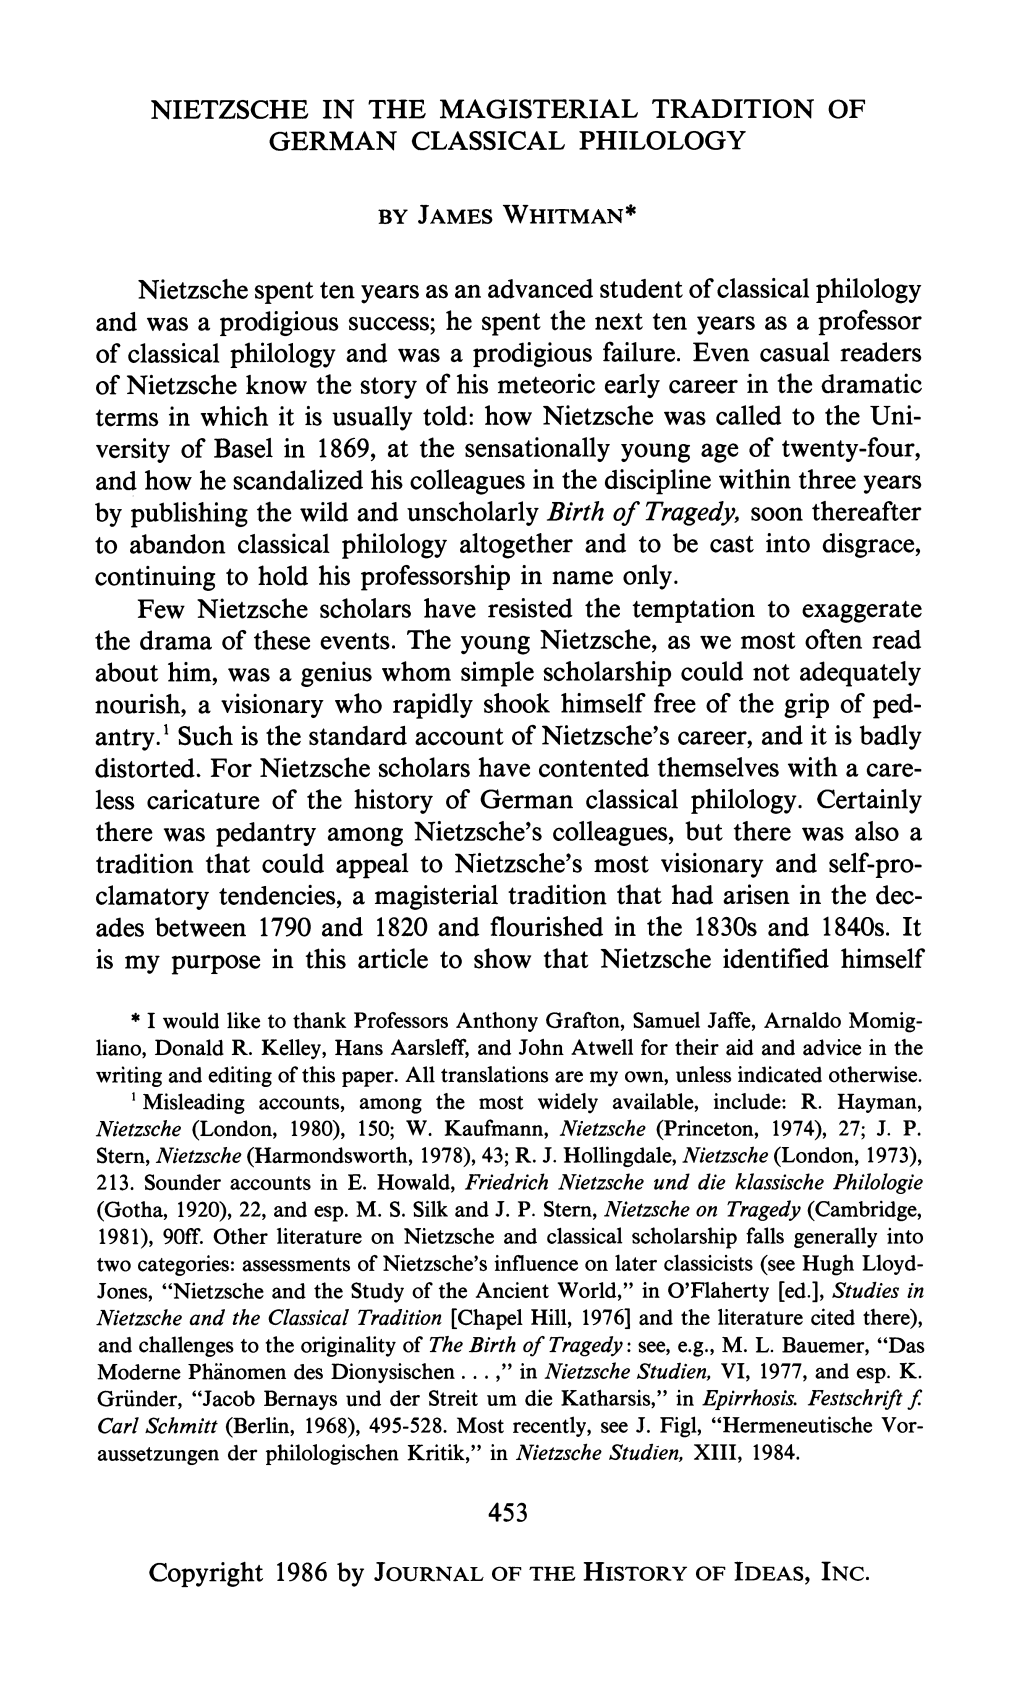 Nietzsche in the Magisterial Tradition of German Classical Philology